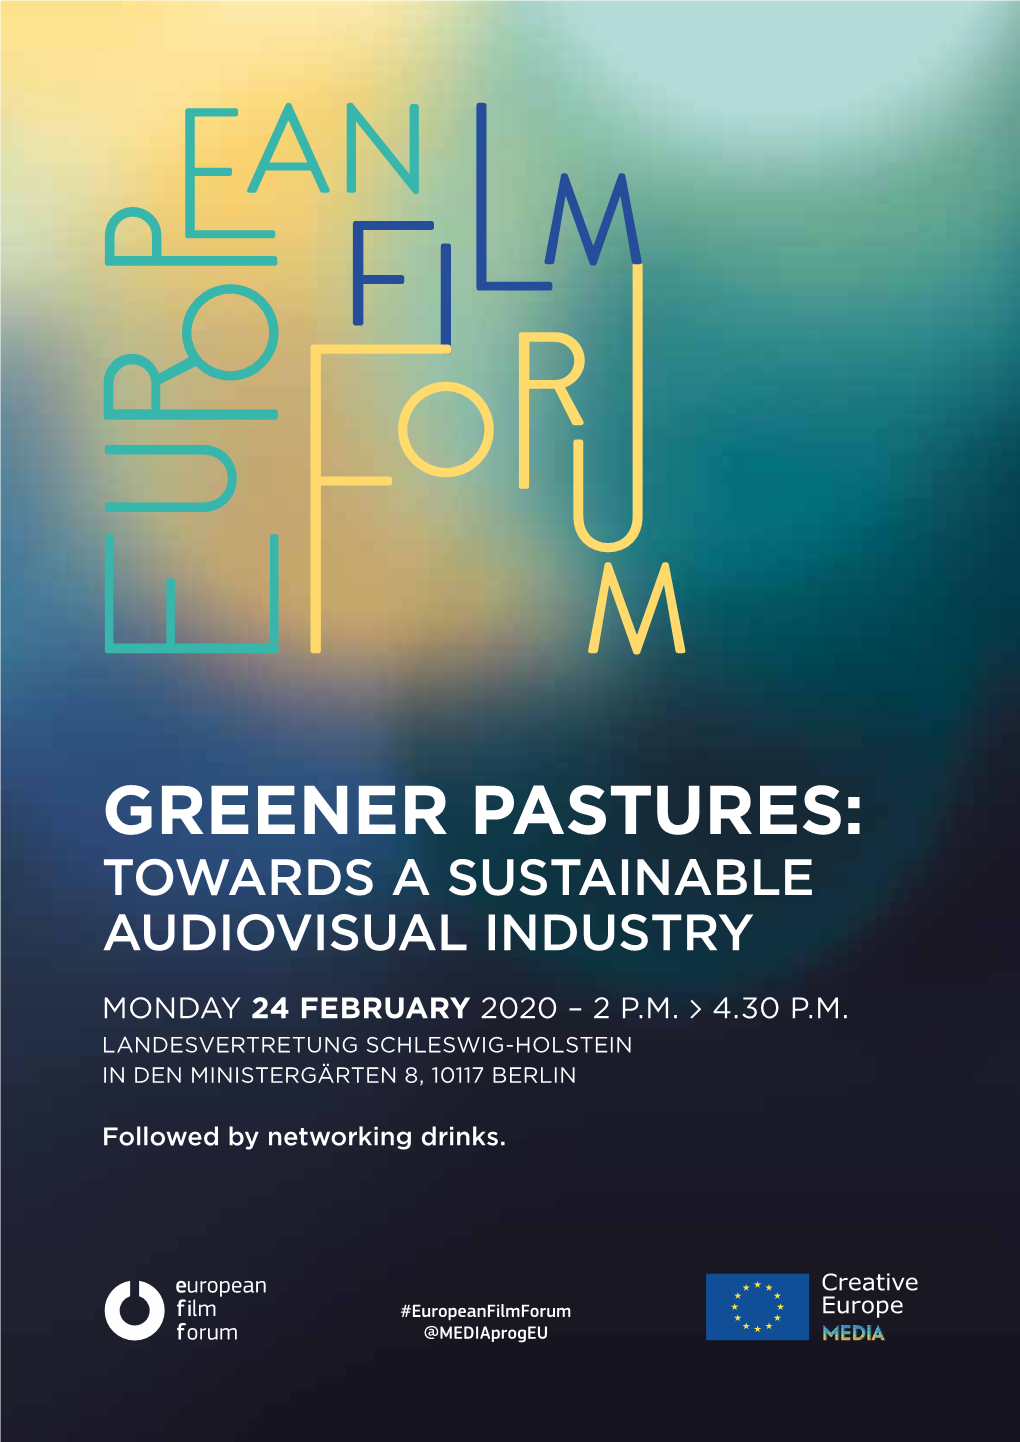 Greener Pastures: Towards a Sustainable Audiovisual Industry